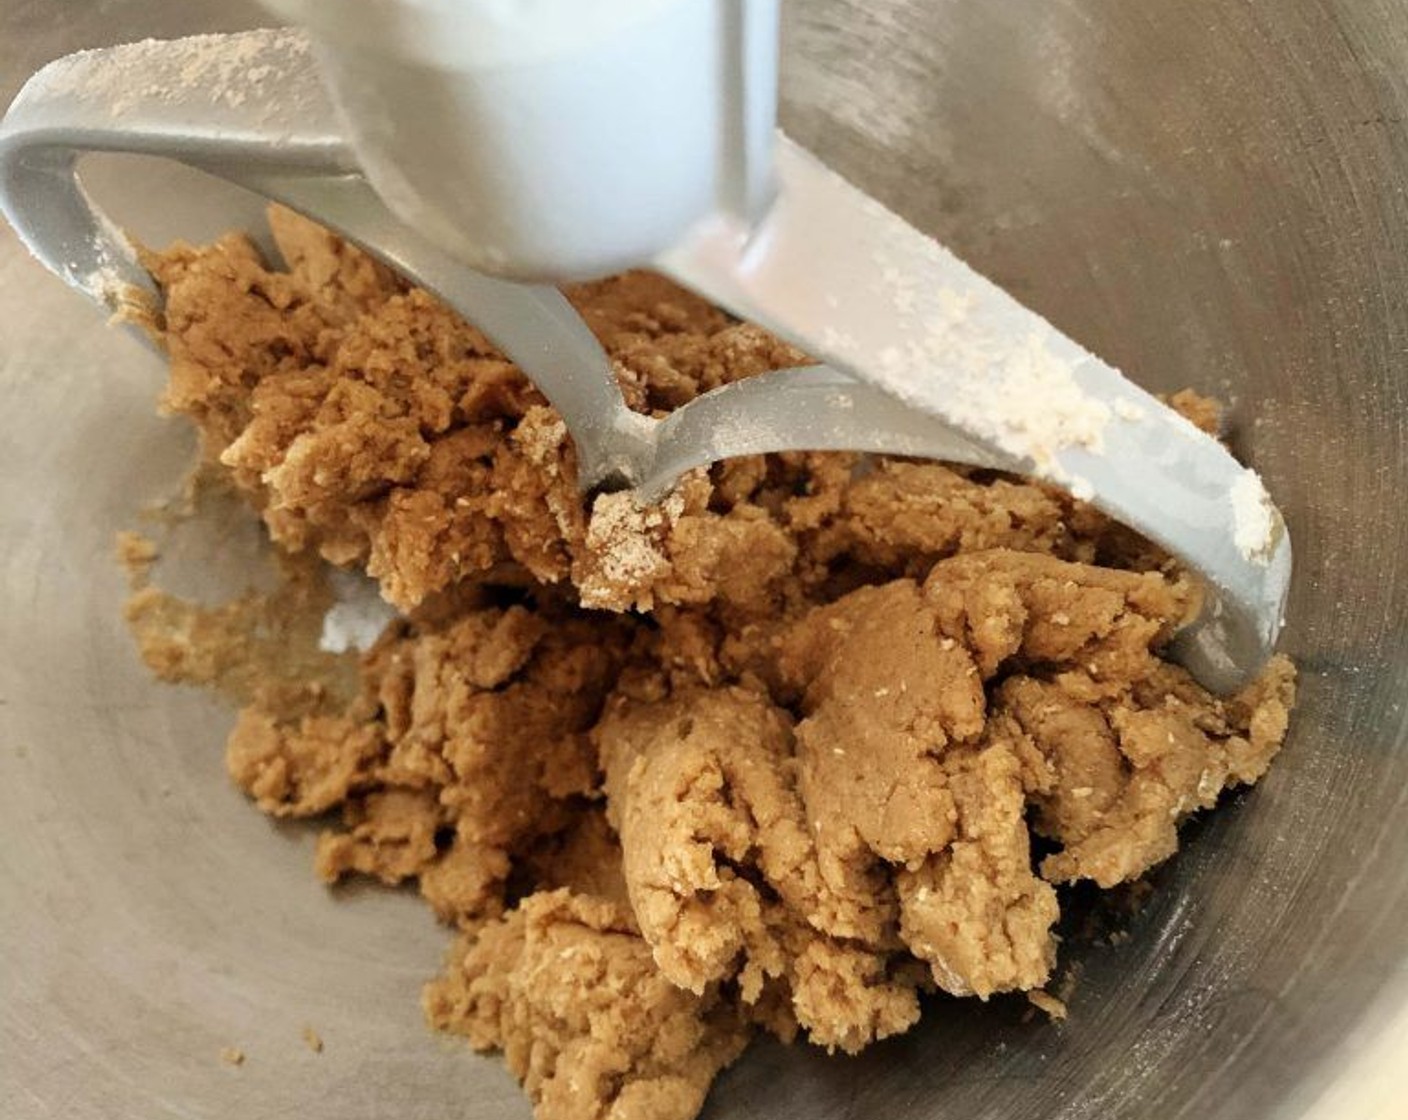 step 3 Add Ground Cinnamon (1 Tbsp), Ground Nutmeg (1 pinch), Vanilla Extract (1 tsp), Hazelnut Flour (2/3 cup), Barley Flour (3 Tbsp) and Whole Wheat Flour (3/4 cup) in small batches. Mix well until all the ingredients are combined and you have a smooth and soft batter.